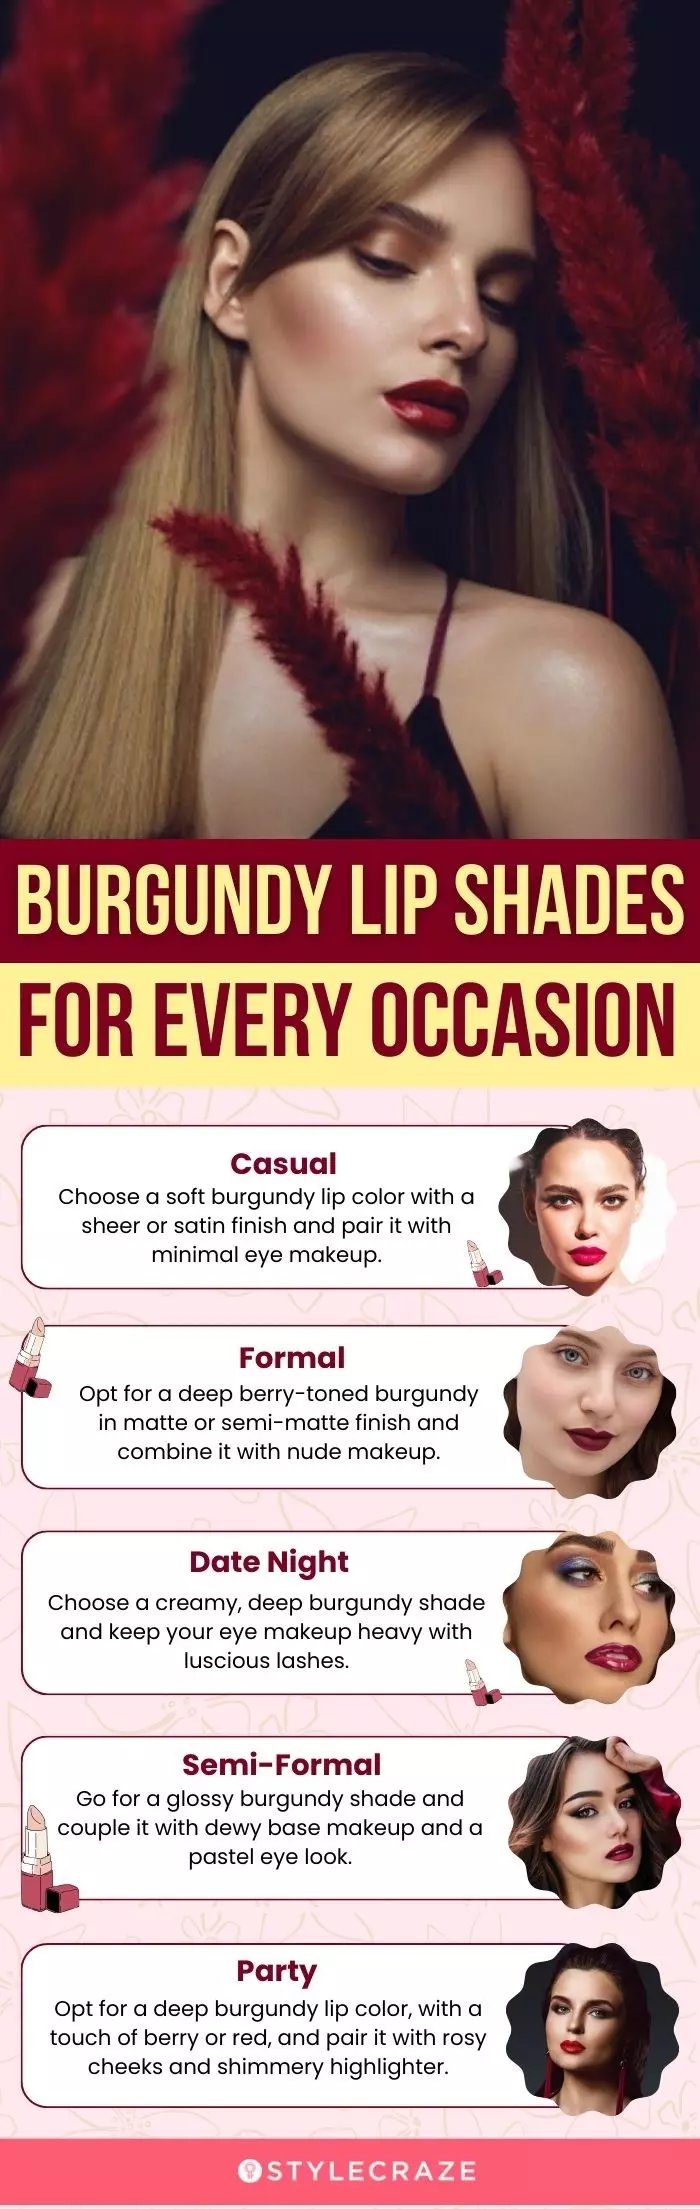 Burgundy Lip Shades For Every Occasion (infographic)